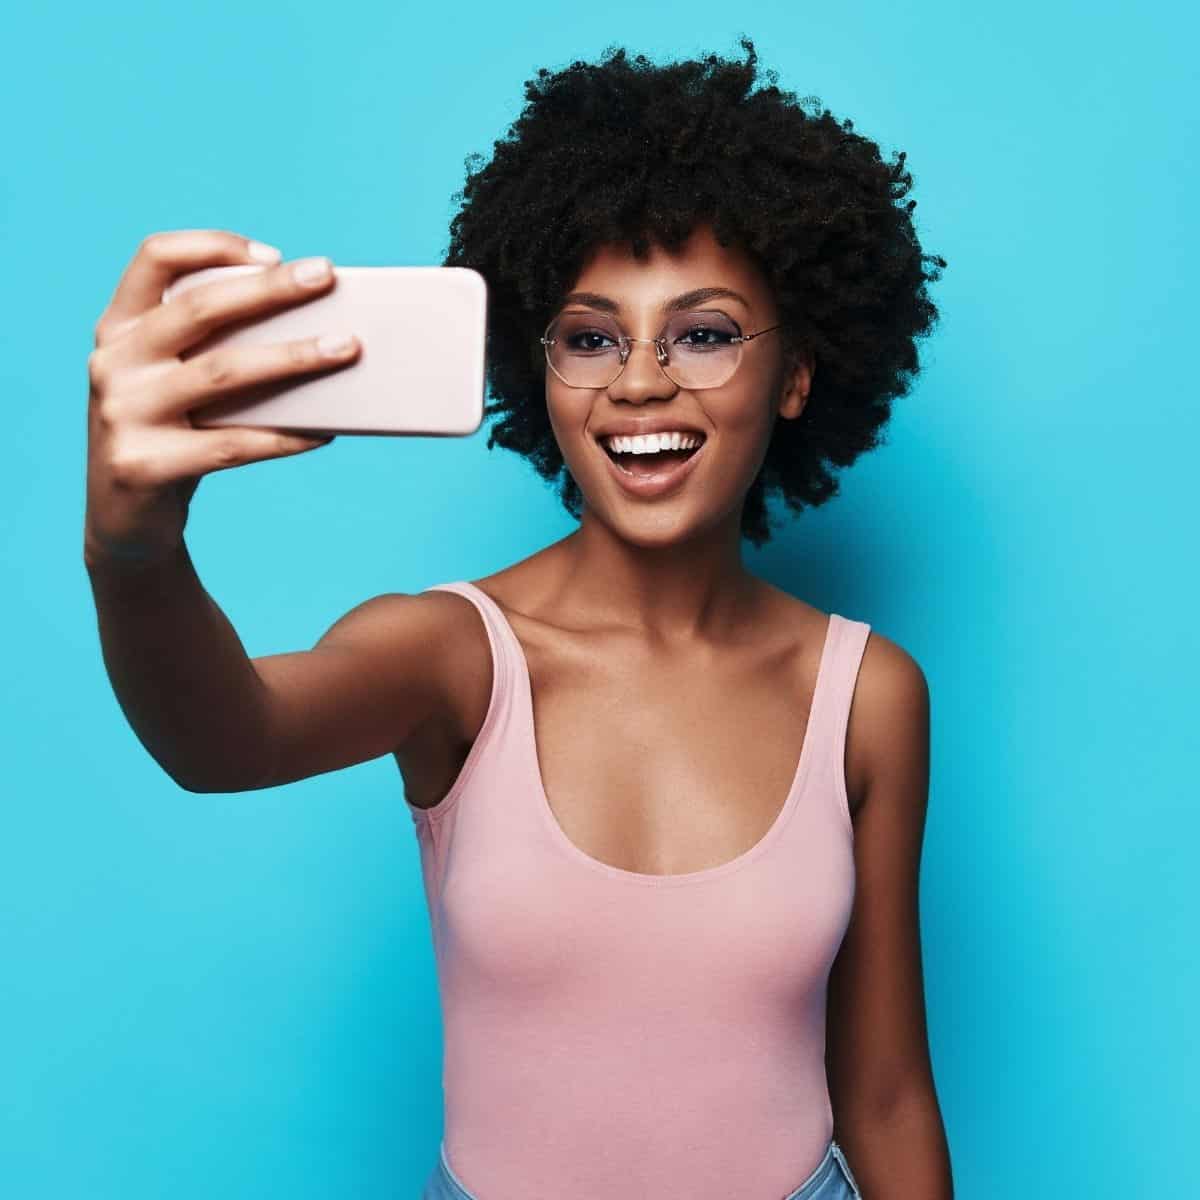 Woman wearing glasses and taking a selfie with a blue background.